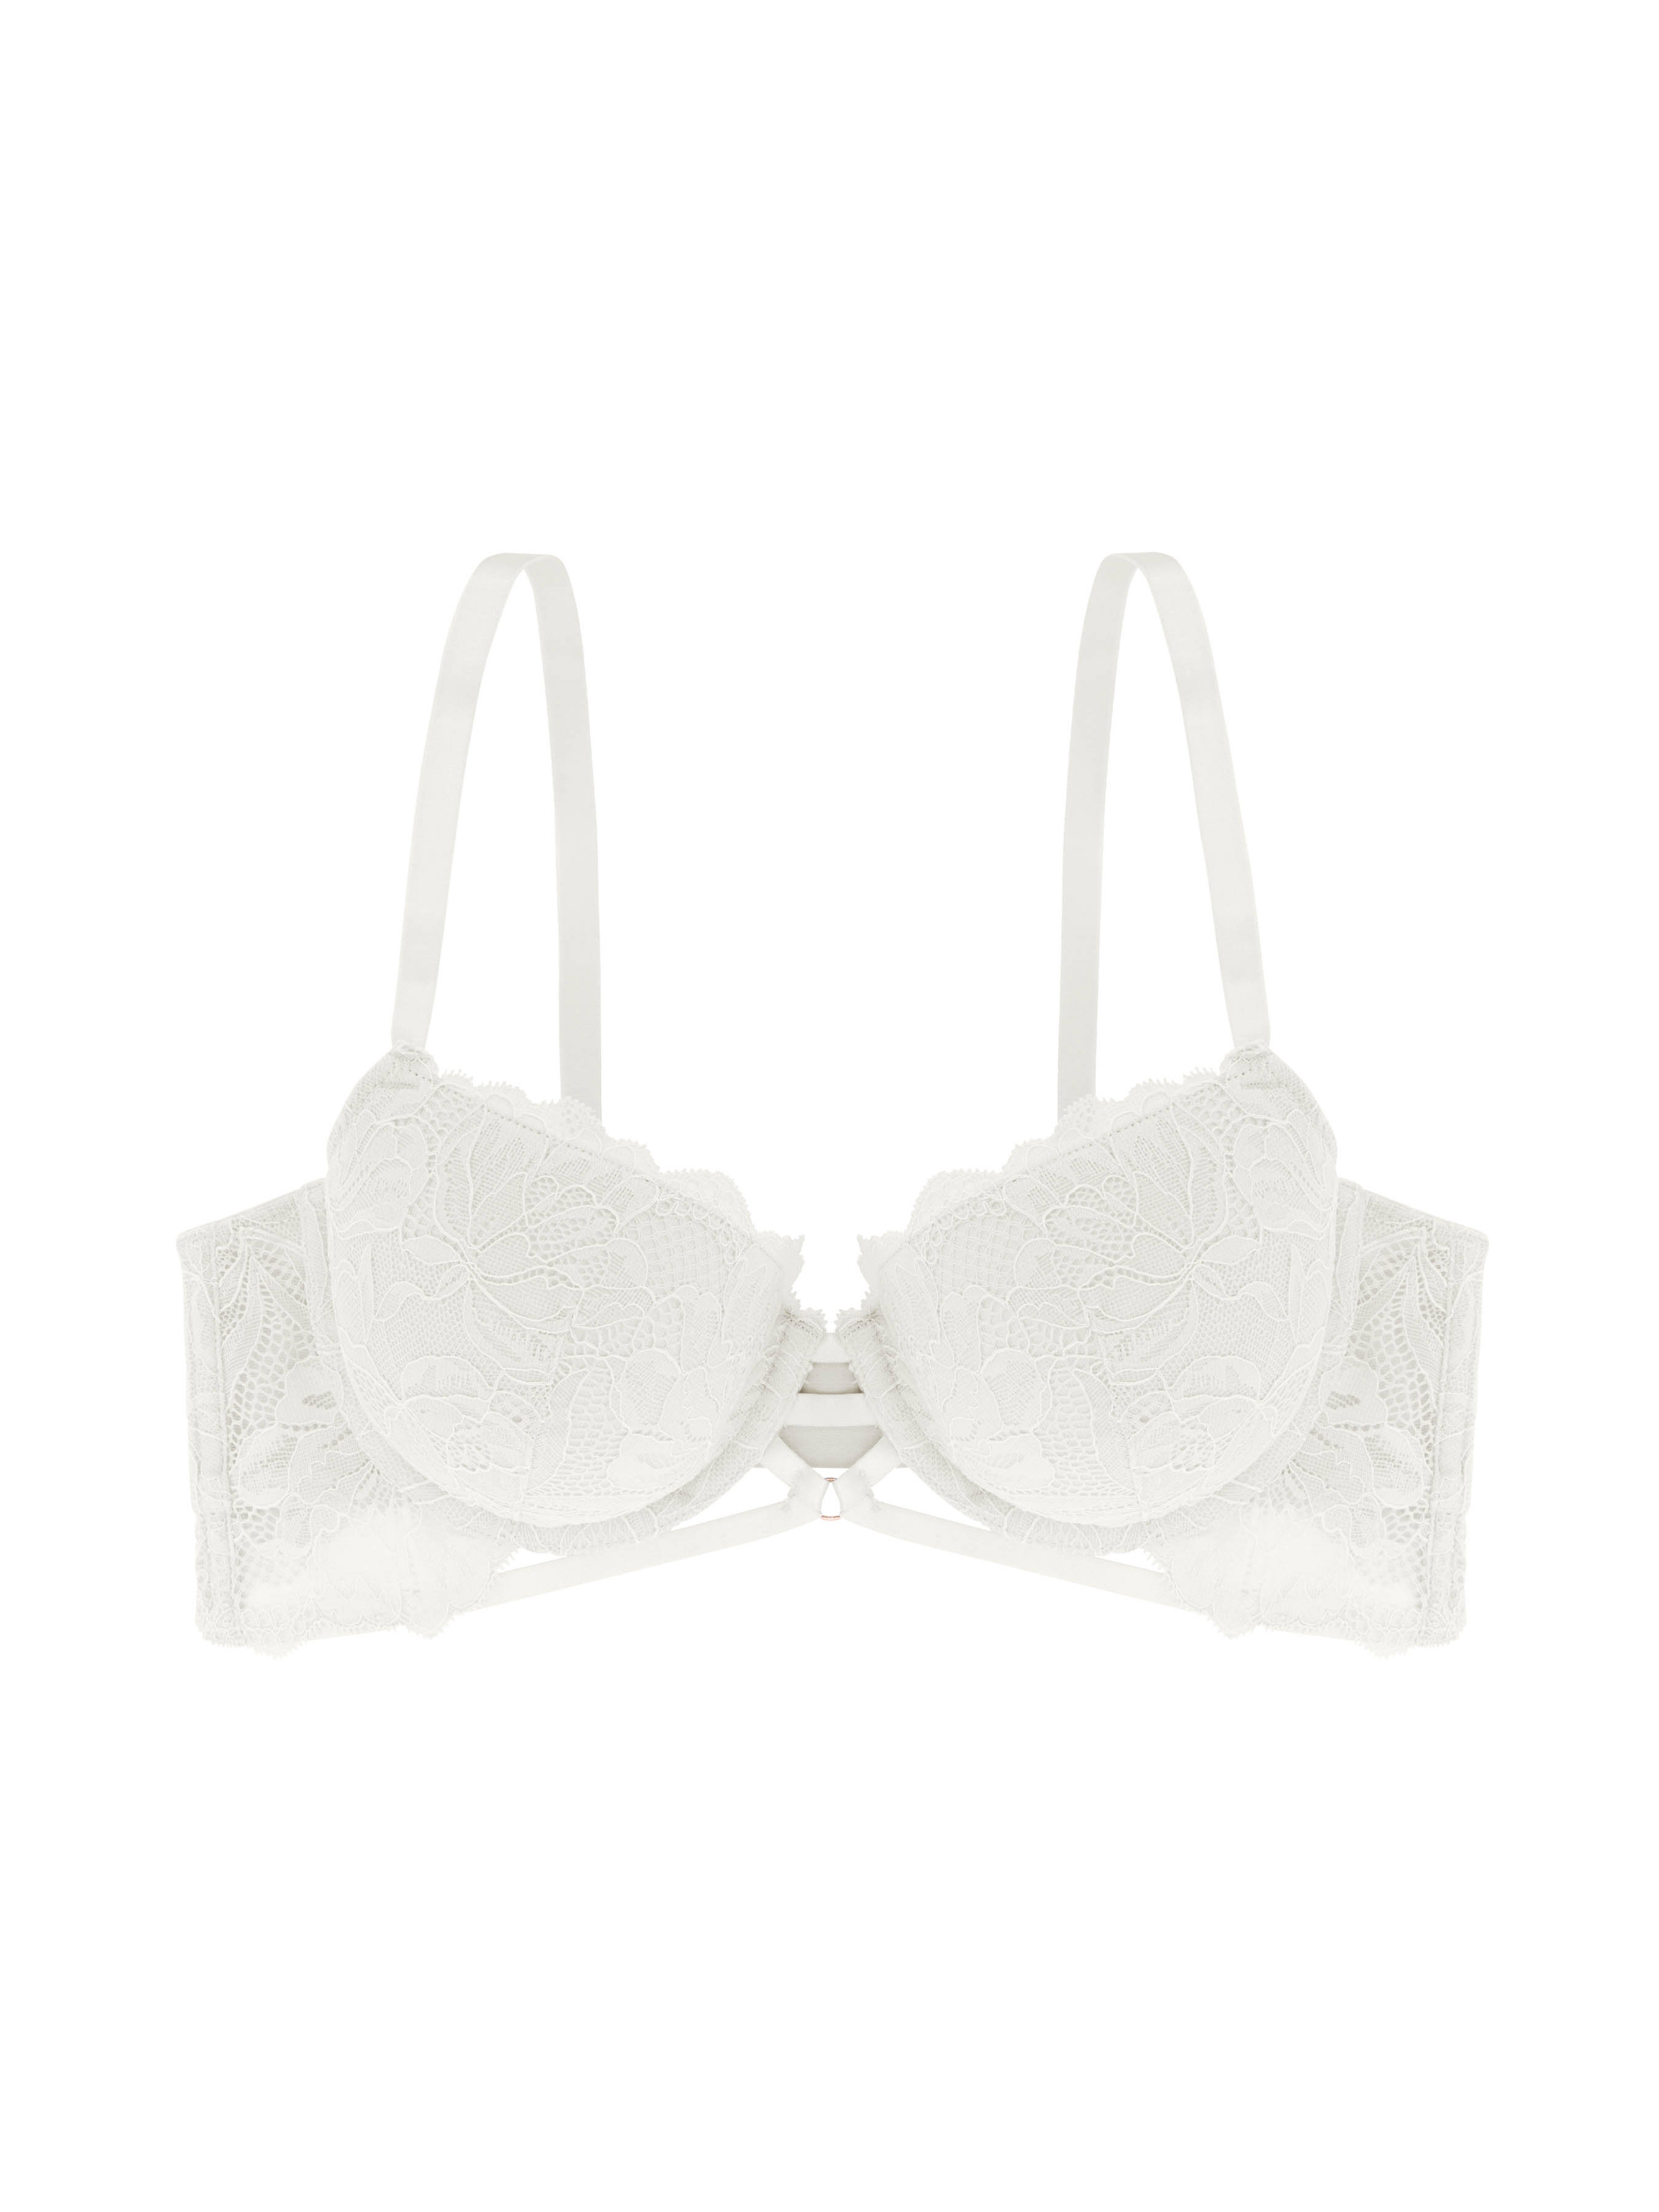 White Bra With Attached Silver Metallic Sheer Strap - I Am More Scarsdale